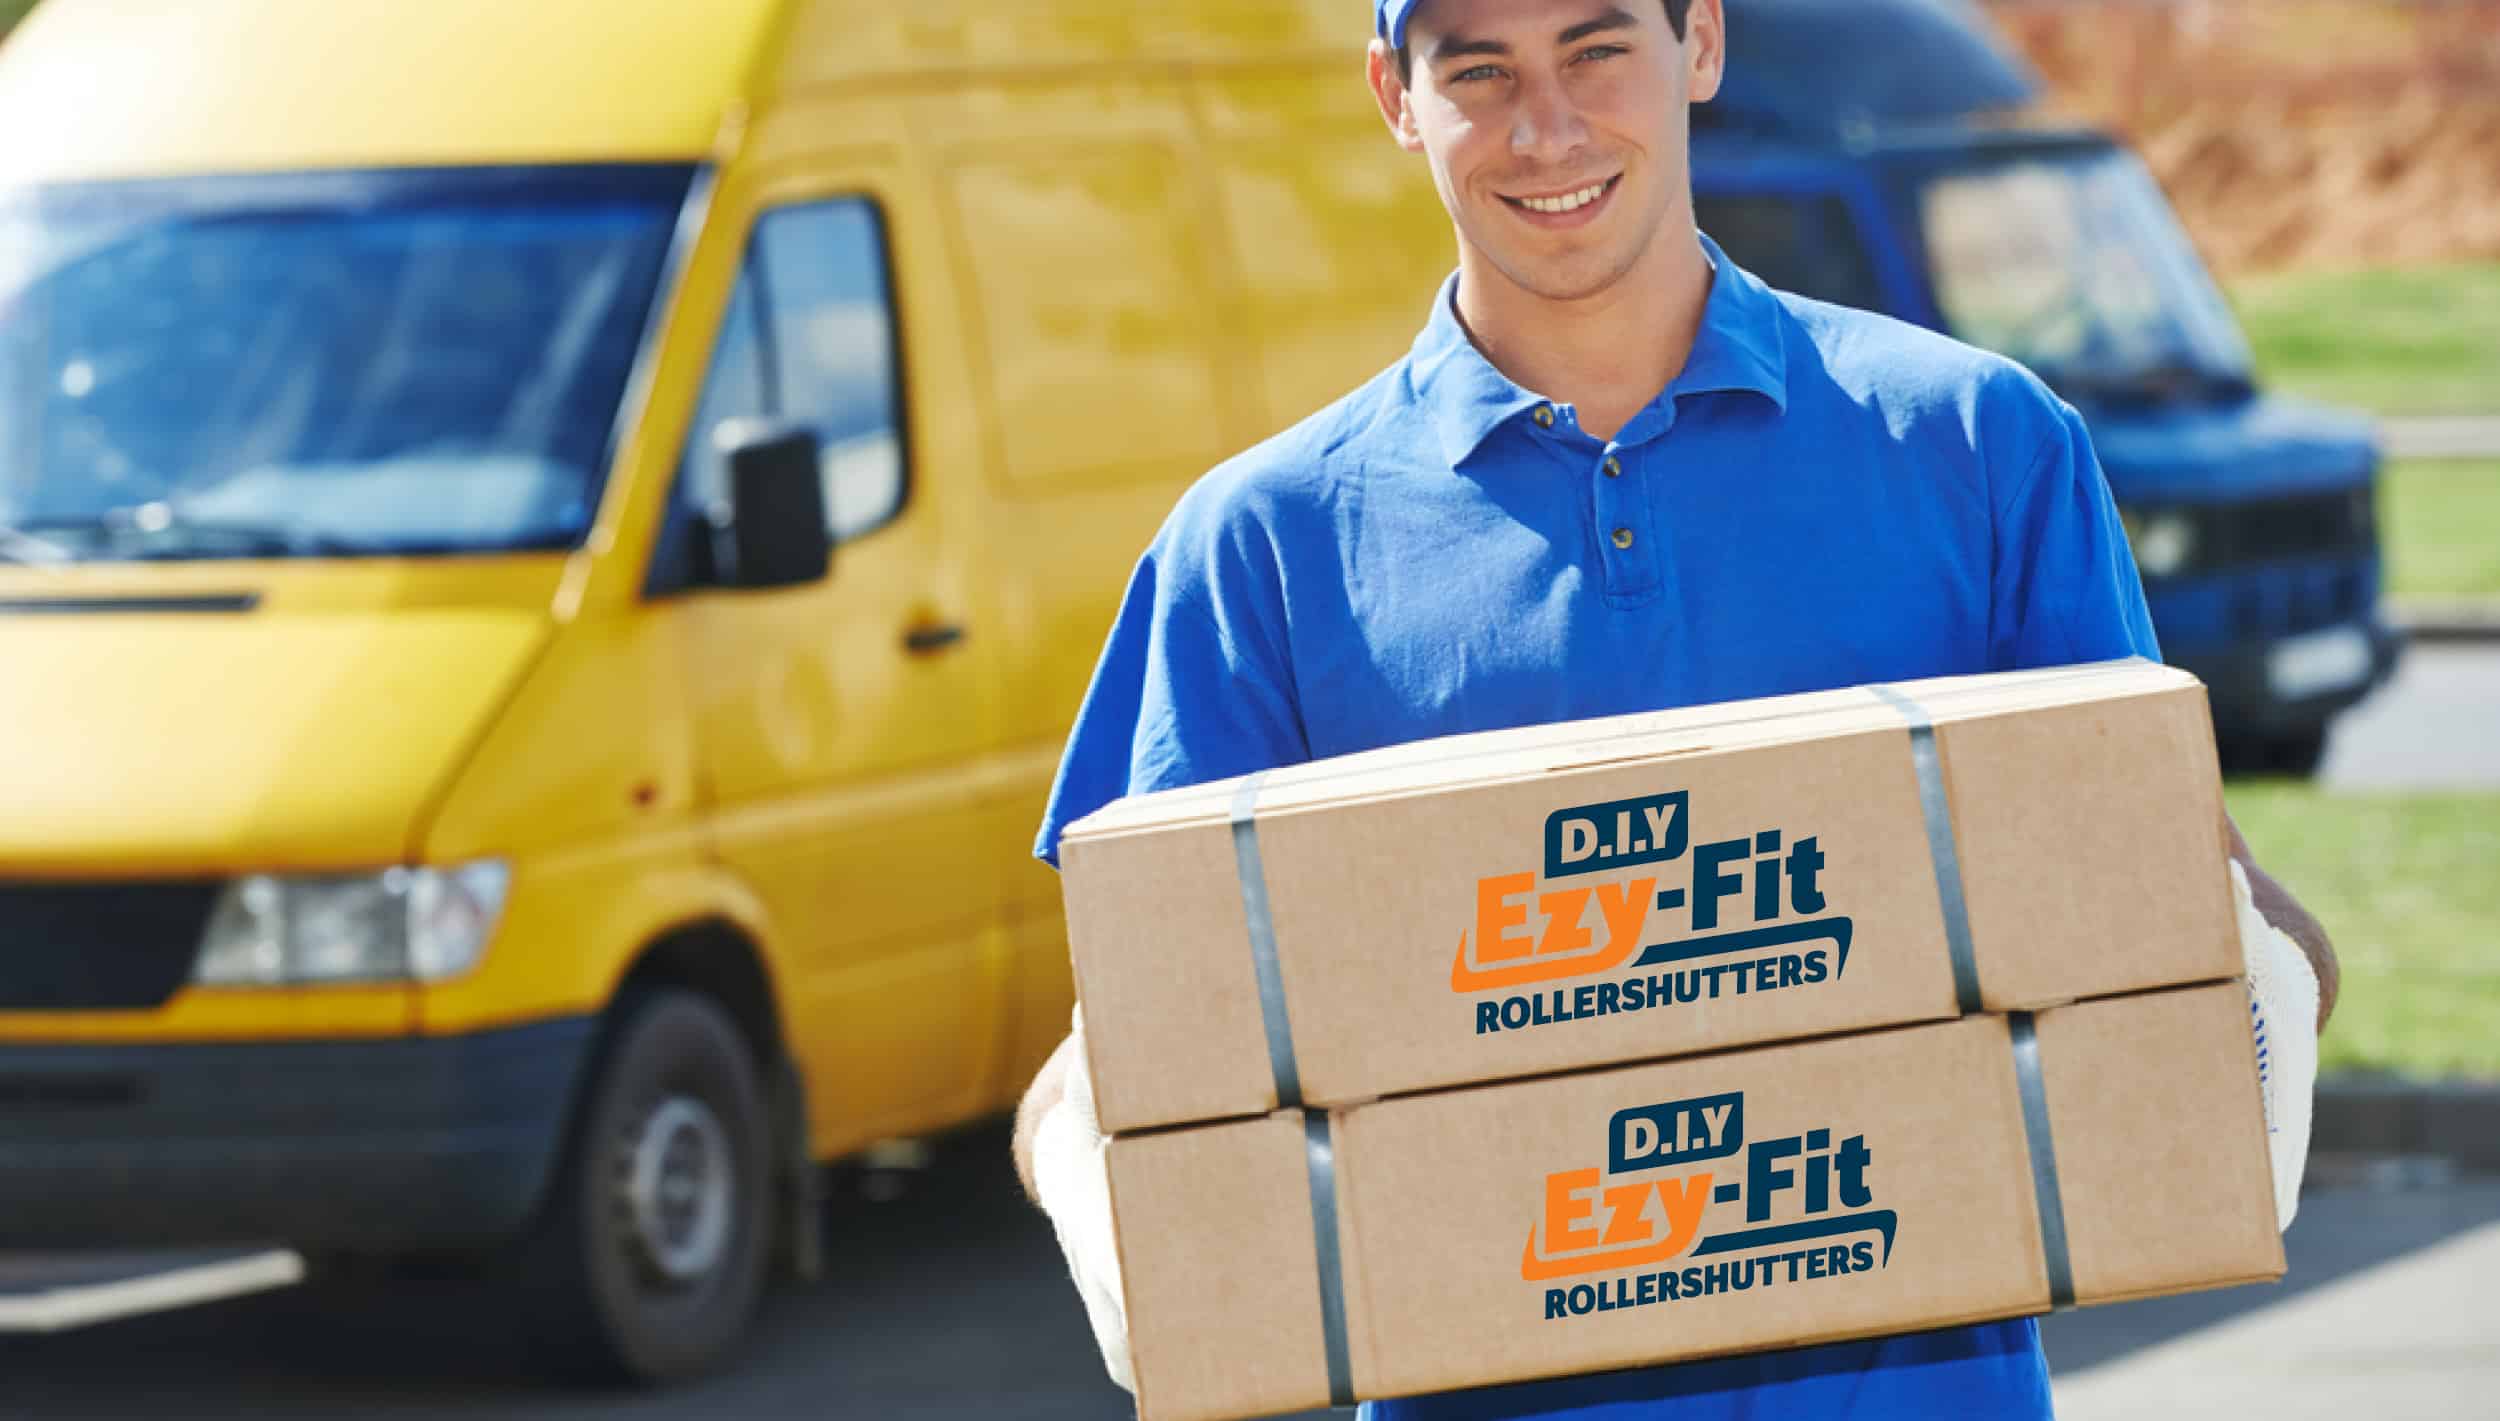 A delivery man delivering EzyFit Roller Shutters in boxes